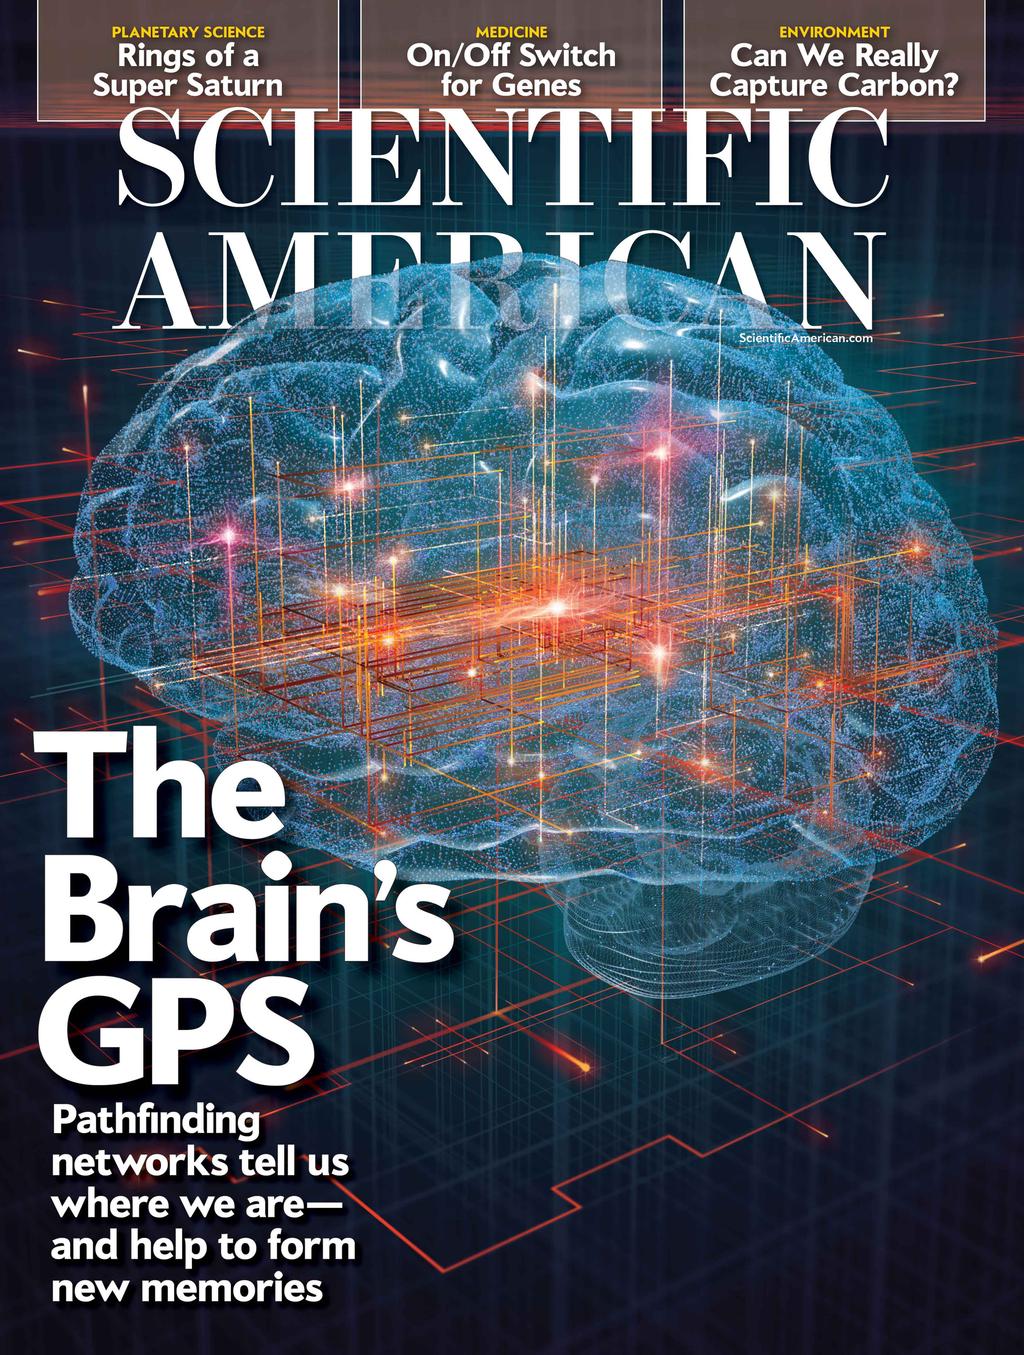 Analysis of SCIENTIFIC AMERICAN Scientific American is the world's leading magazine about scientific discoveries and technological innovations.